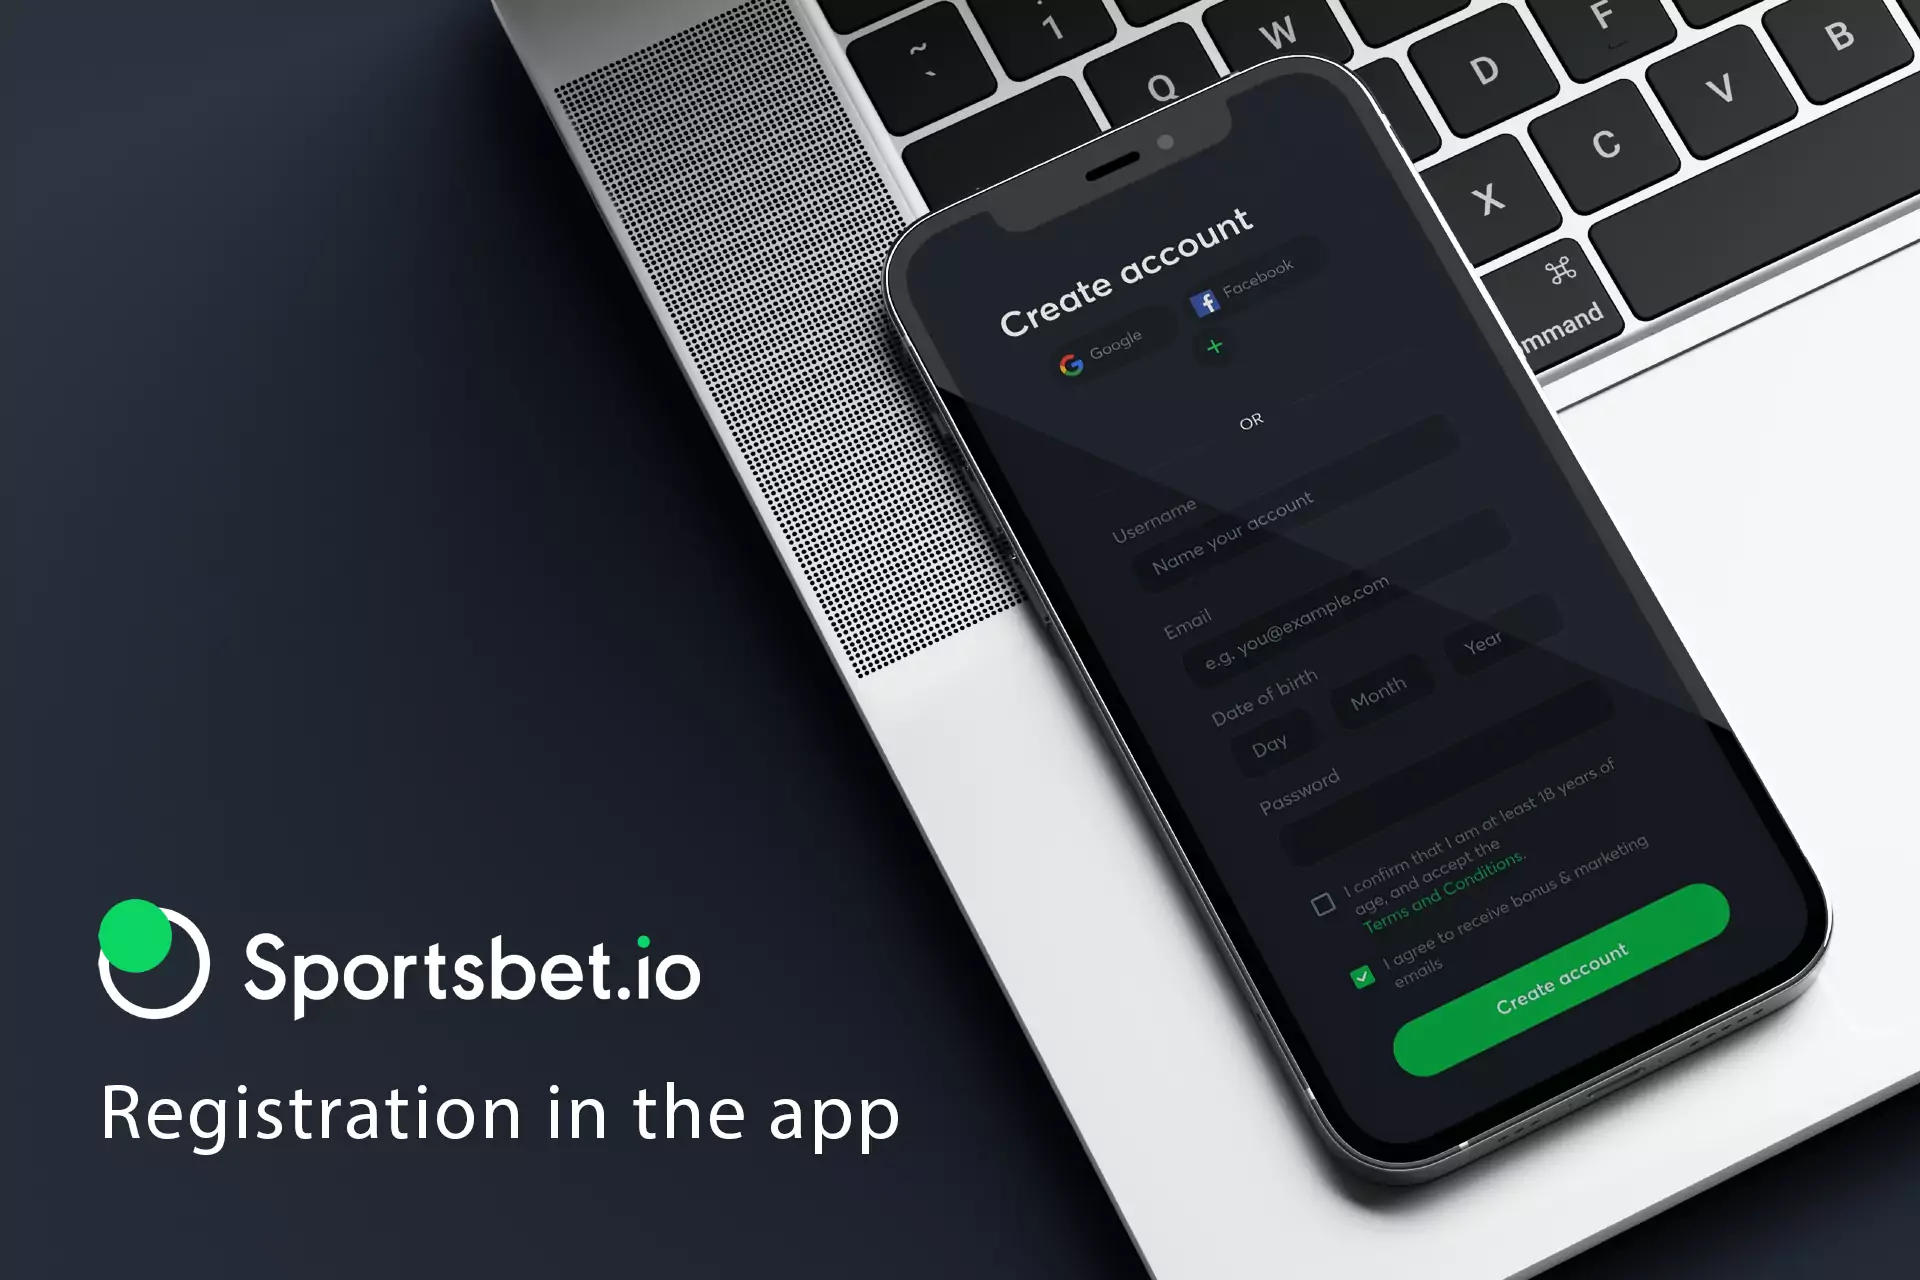 If you installed the Sportsbet app on your smartphone, run it and create an account in there.